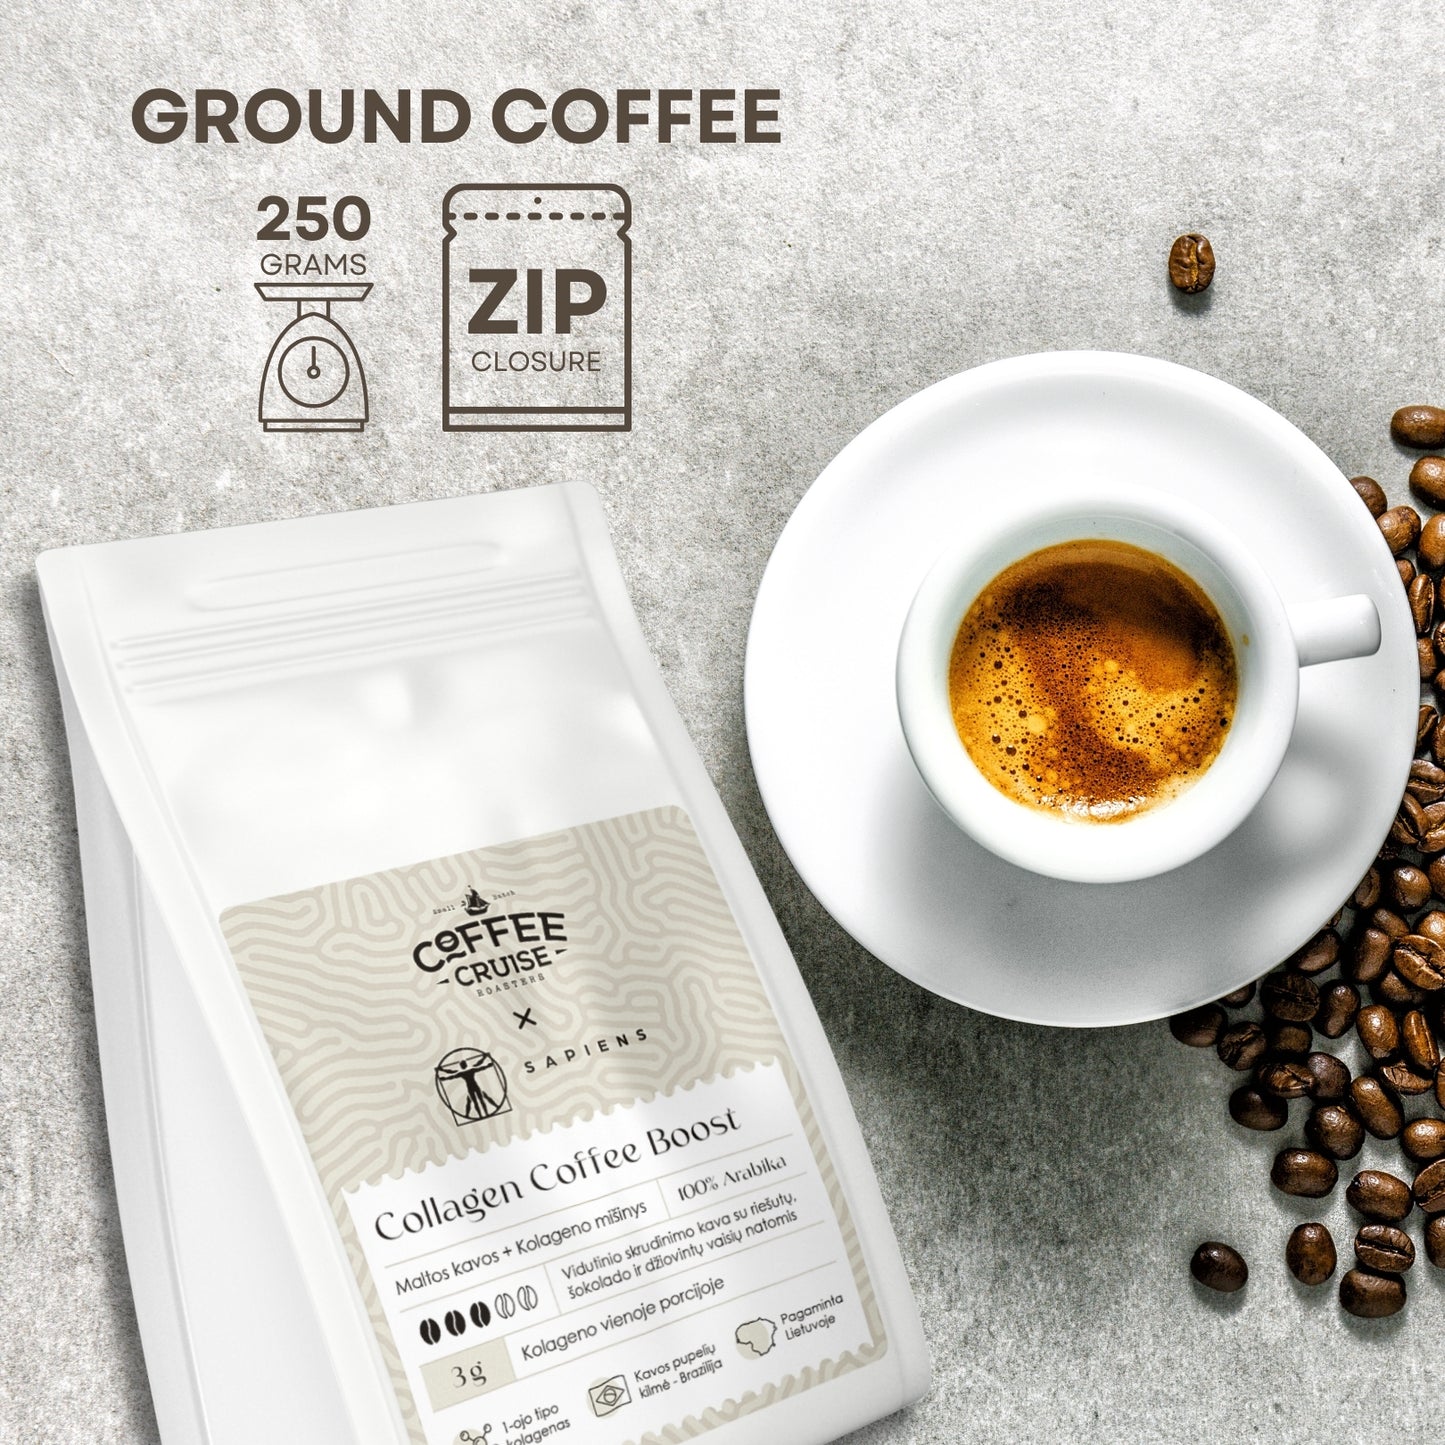 COFFEE CRUISE Ground Coffee with Collagen 250g - Medium Roasting - Aroma Caramel and honey - For All Coffee Machines - 100% Arabica